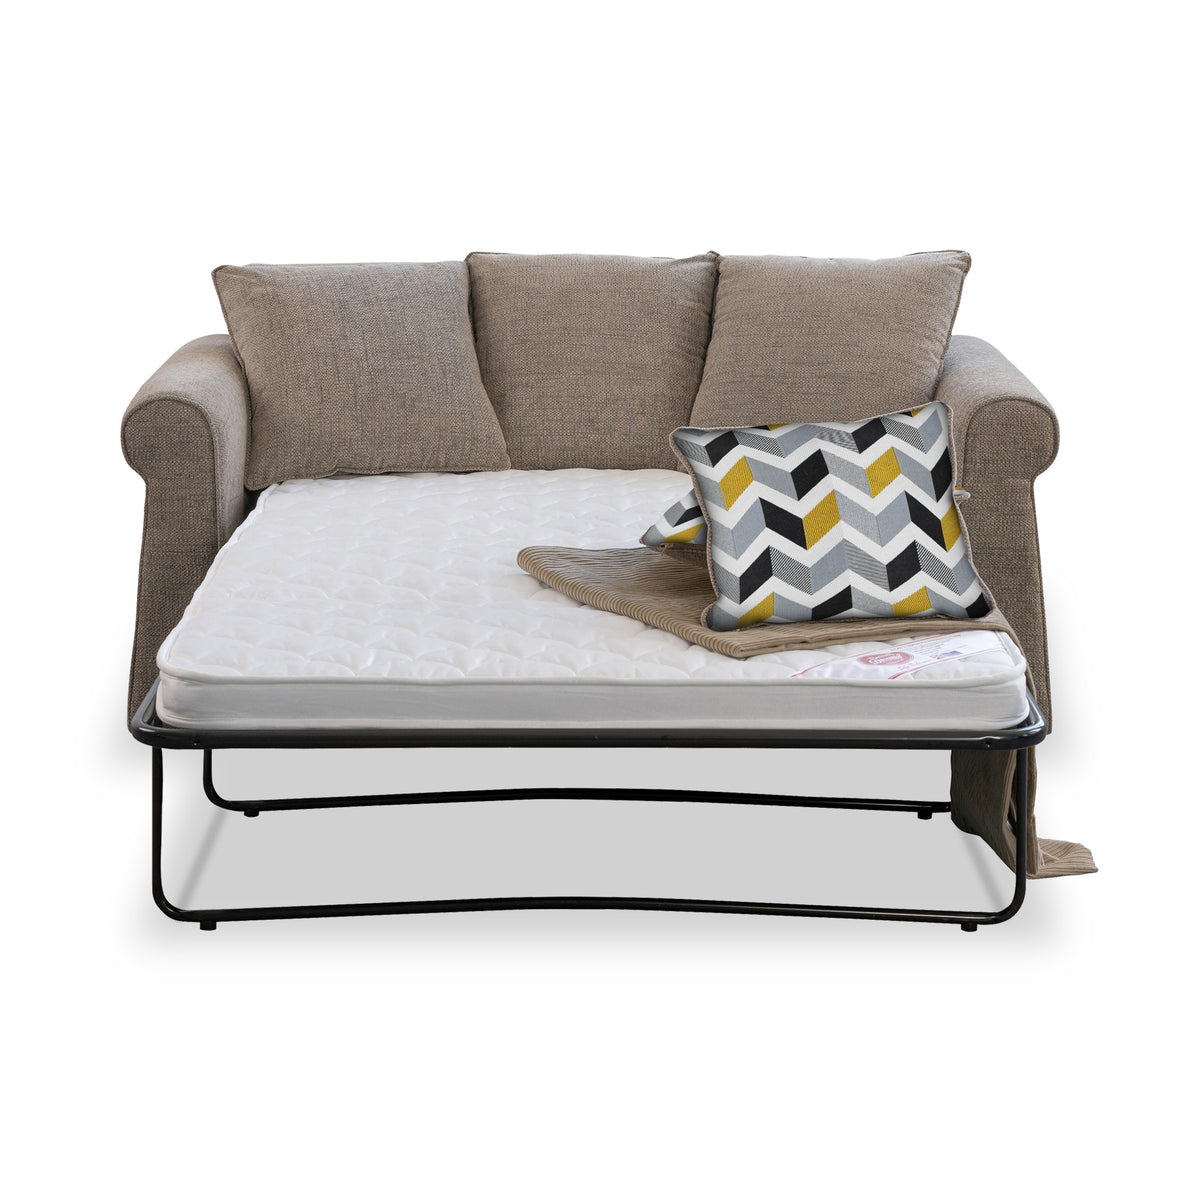 Branston Fawn Soft Weave 2 Seater Sofabed with Mustard Scatter Cushions from Roseland Furniture